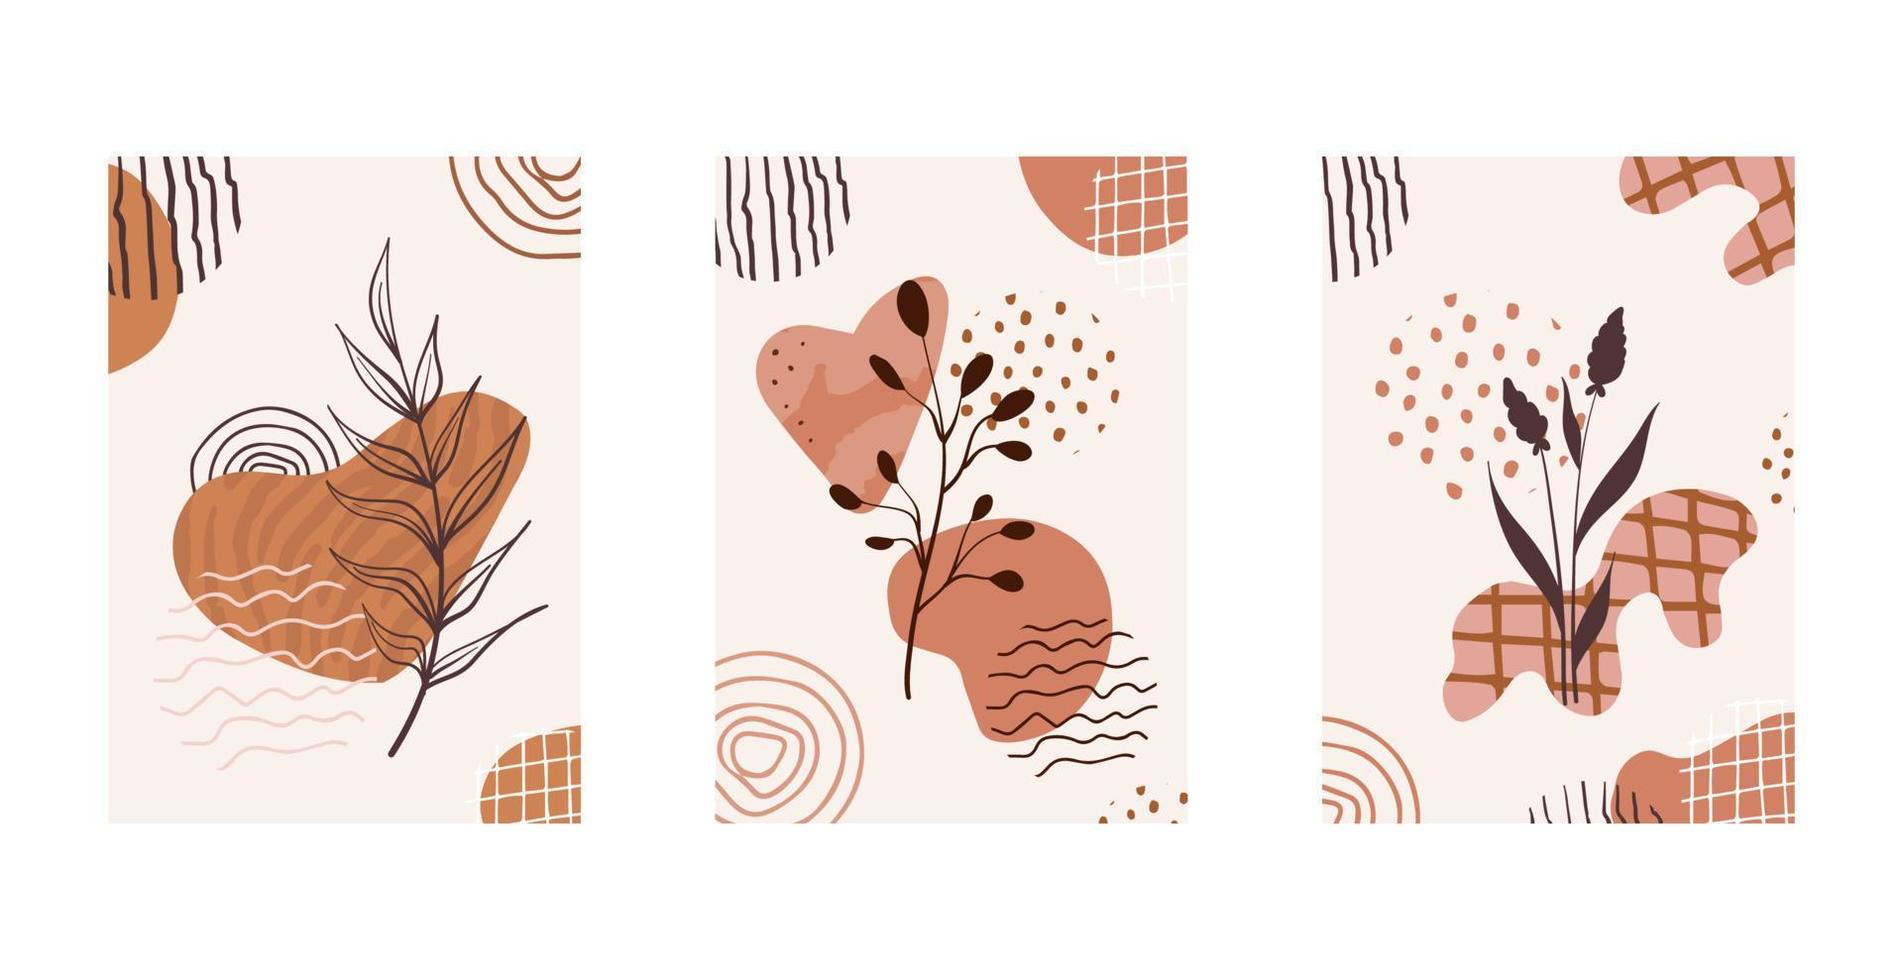 Set of compositions with leaves abstract and shapes, textures. Trendy collage for design in an ecological style. Abstract Plant Art design for print, cover, wallpaper. vector